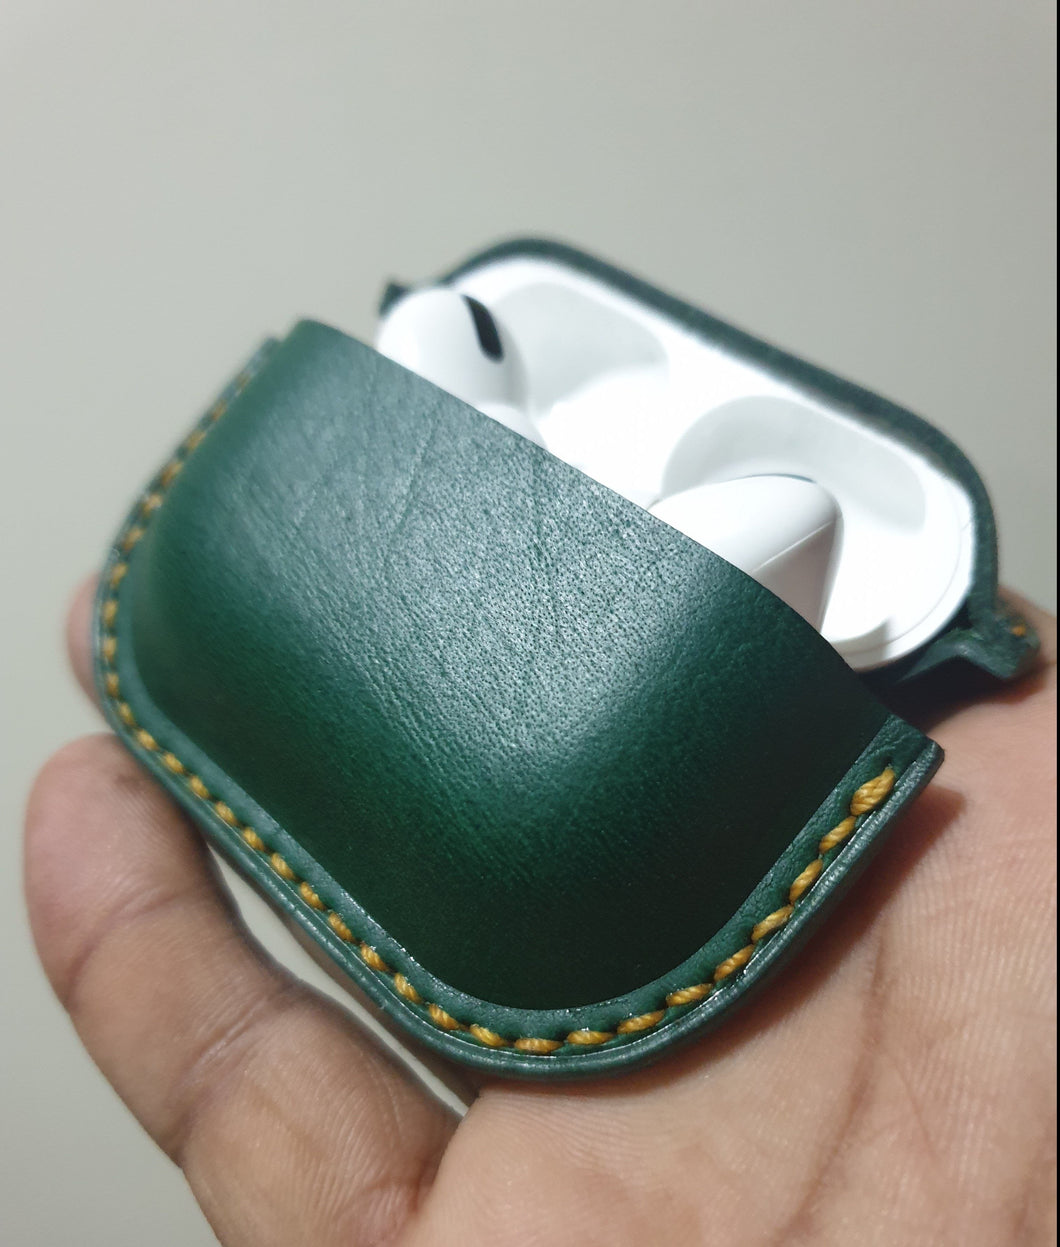 Indianleathercraft Green Apple Airpods pro leather case